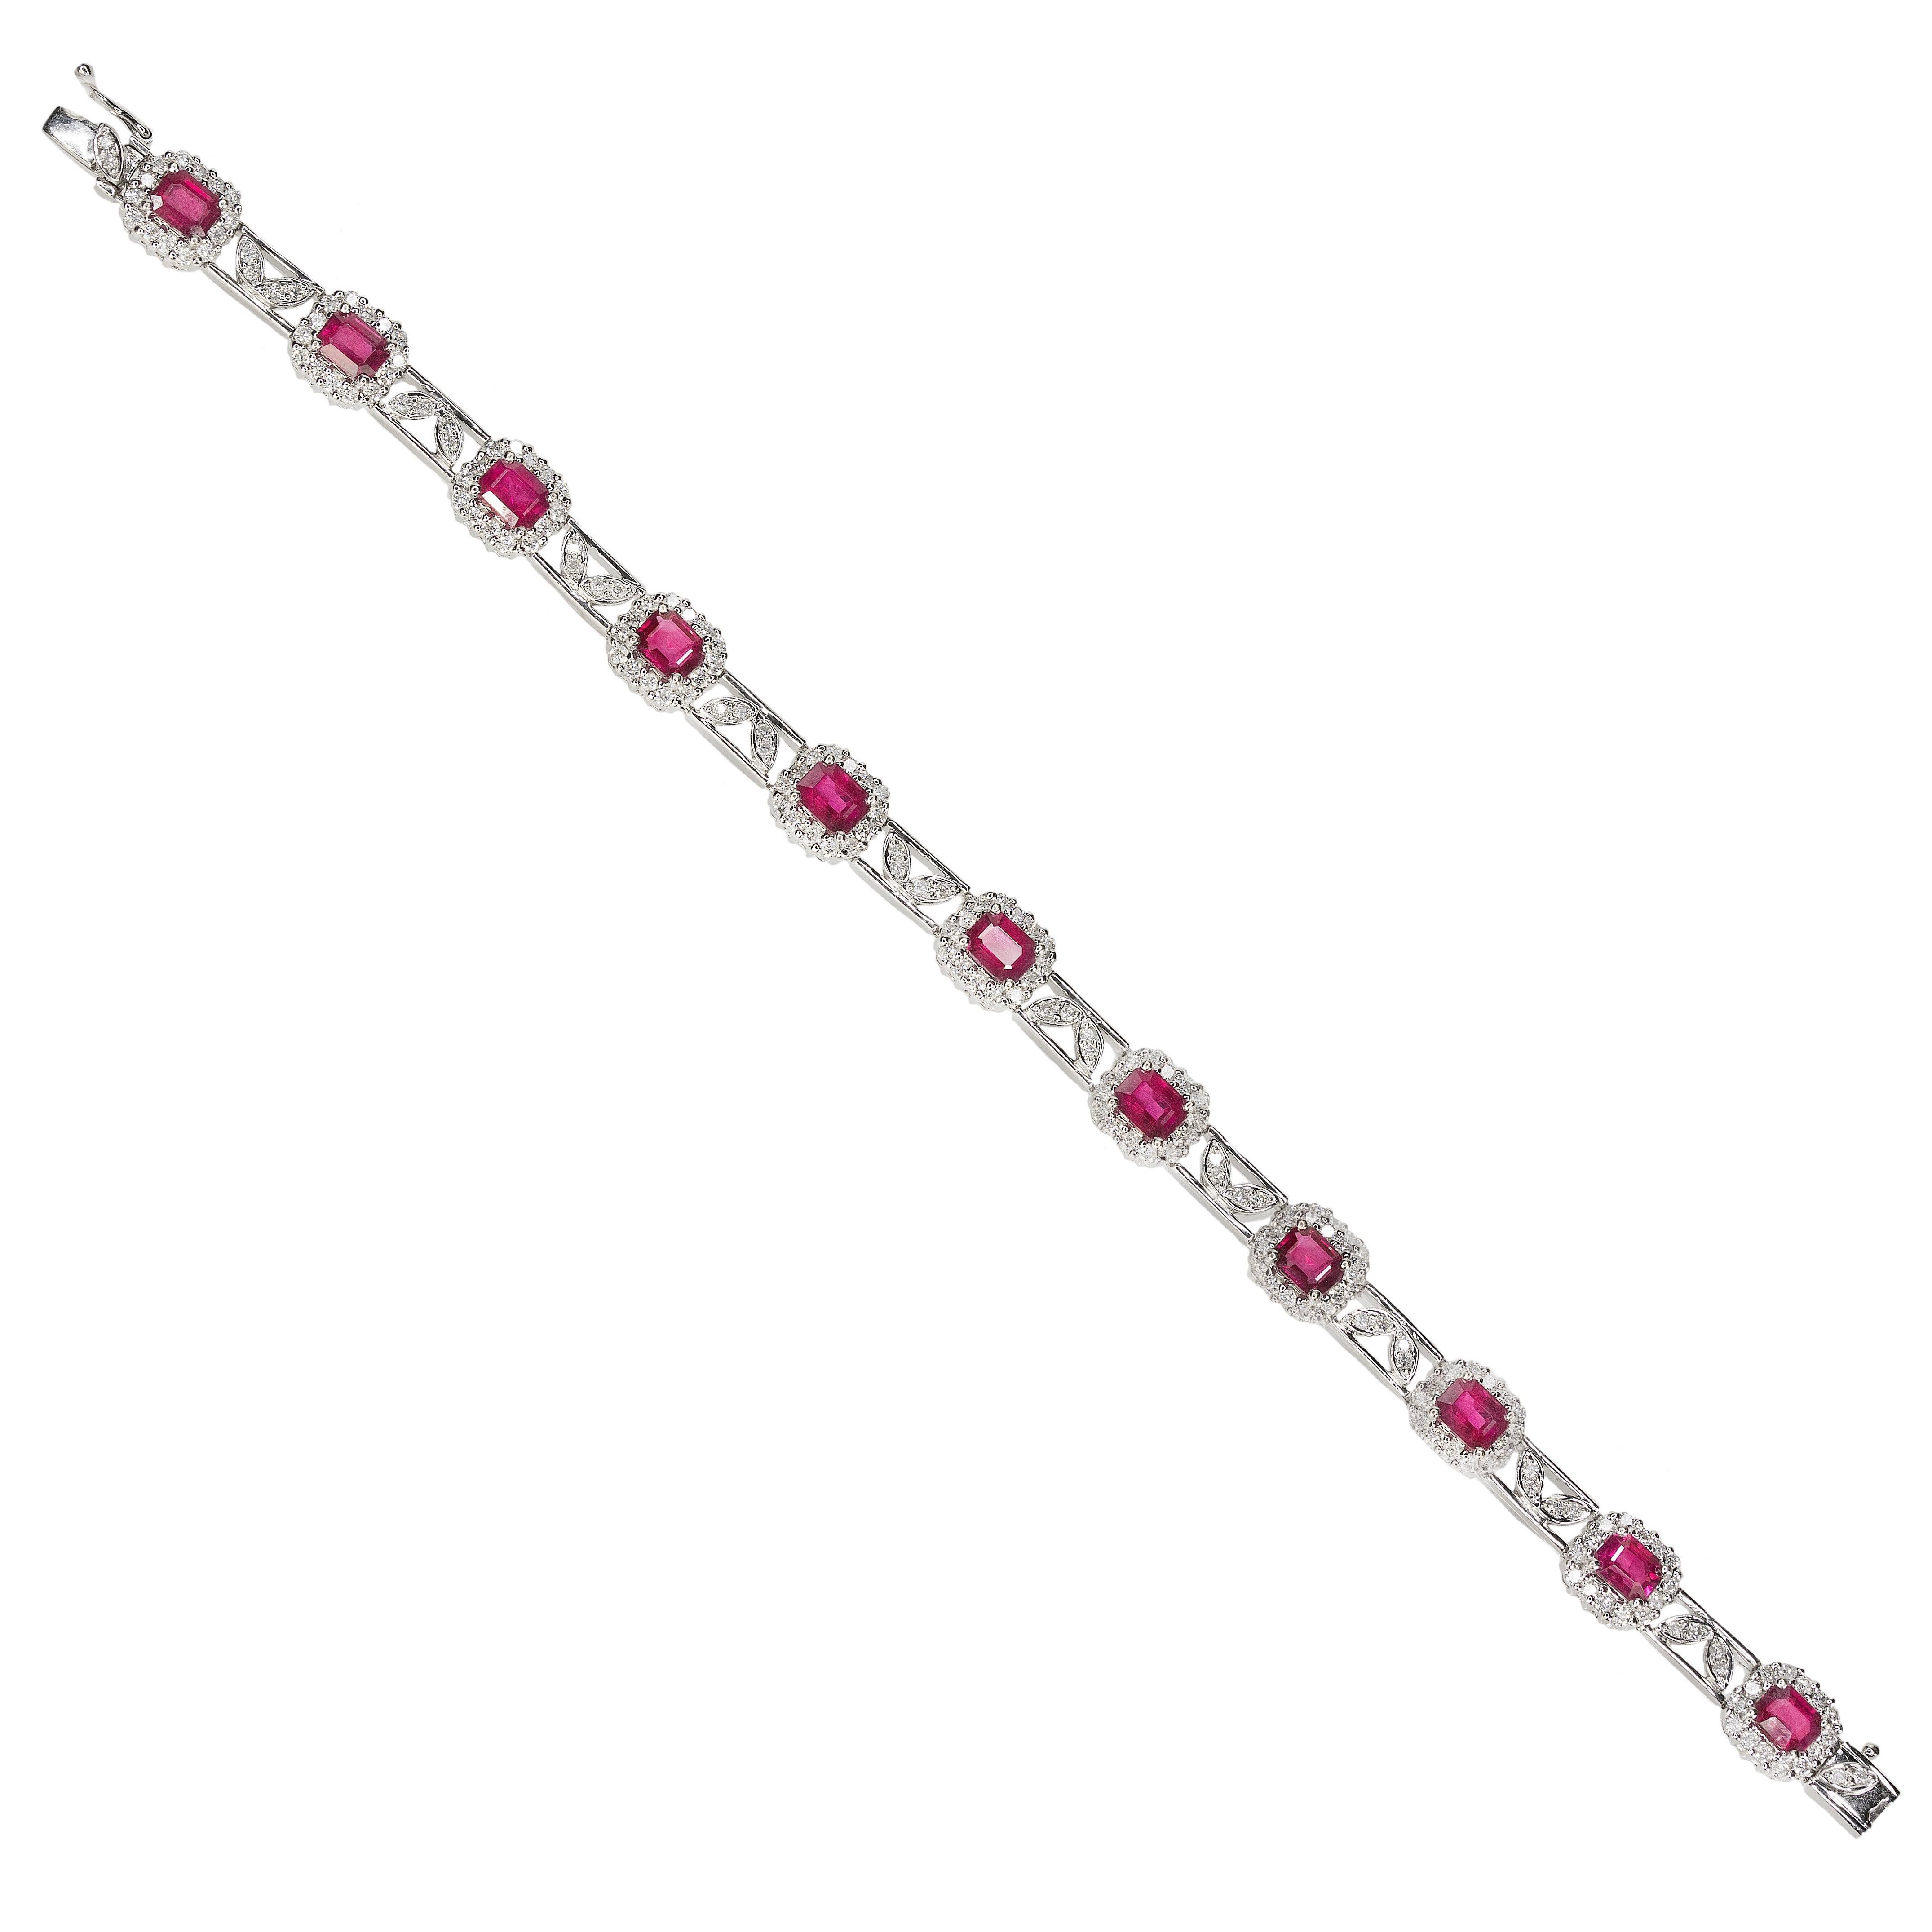 18k White Gold Bracelet containing 11 emerald cut Rubies weighing approximately 8.00 carats and 176 round diamonds weighing approximately 2.00 carats, 18.06g